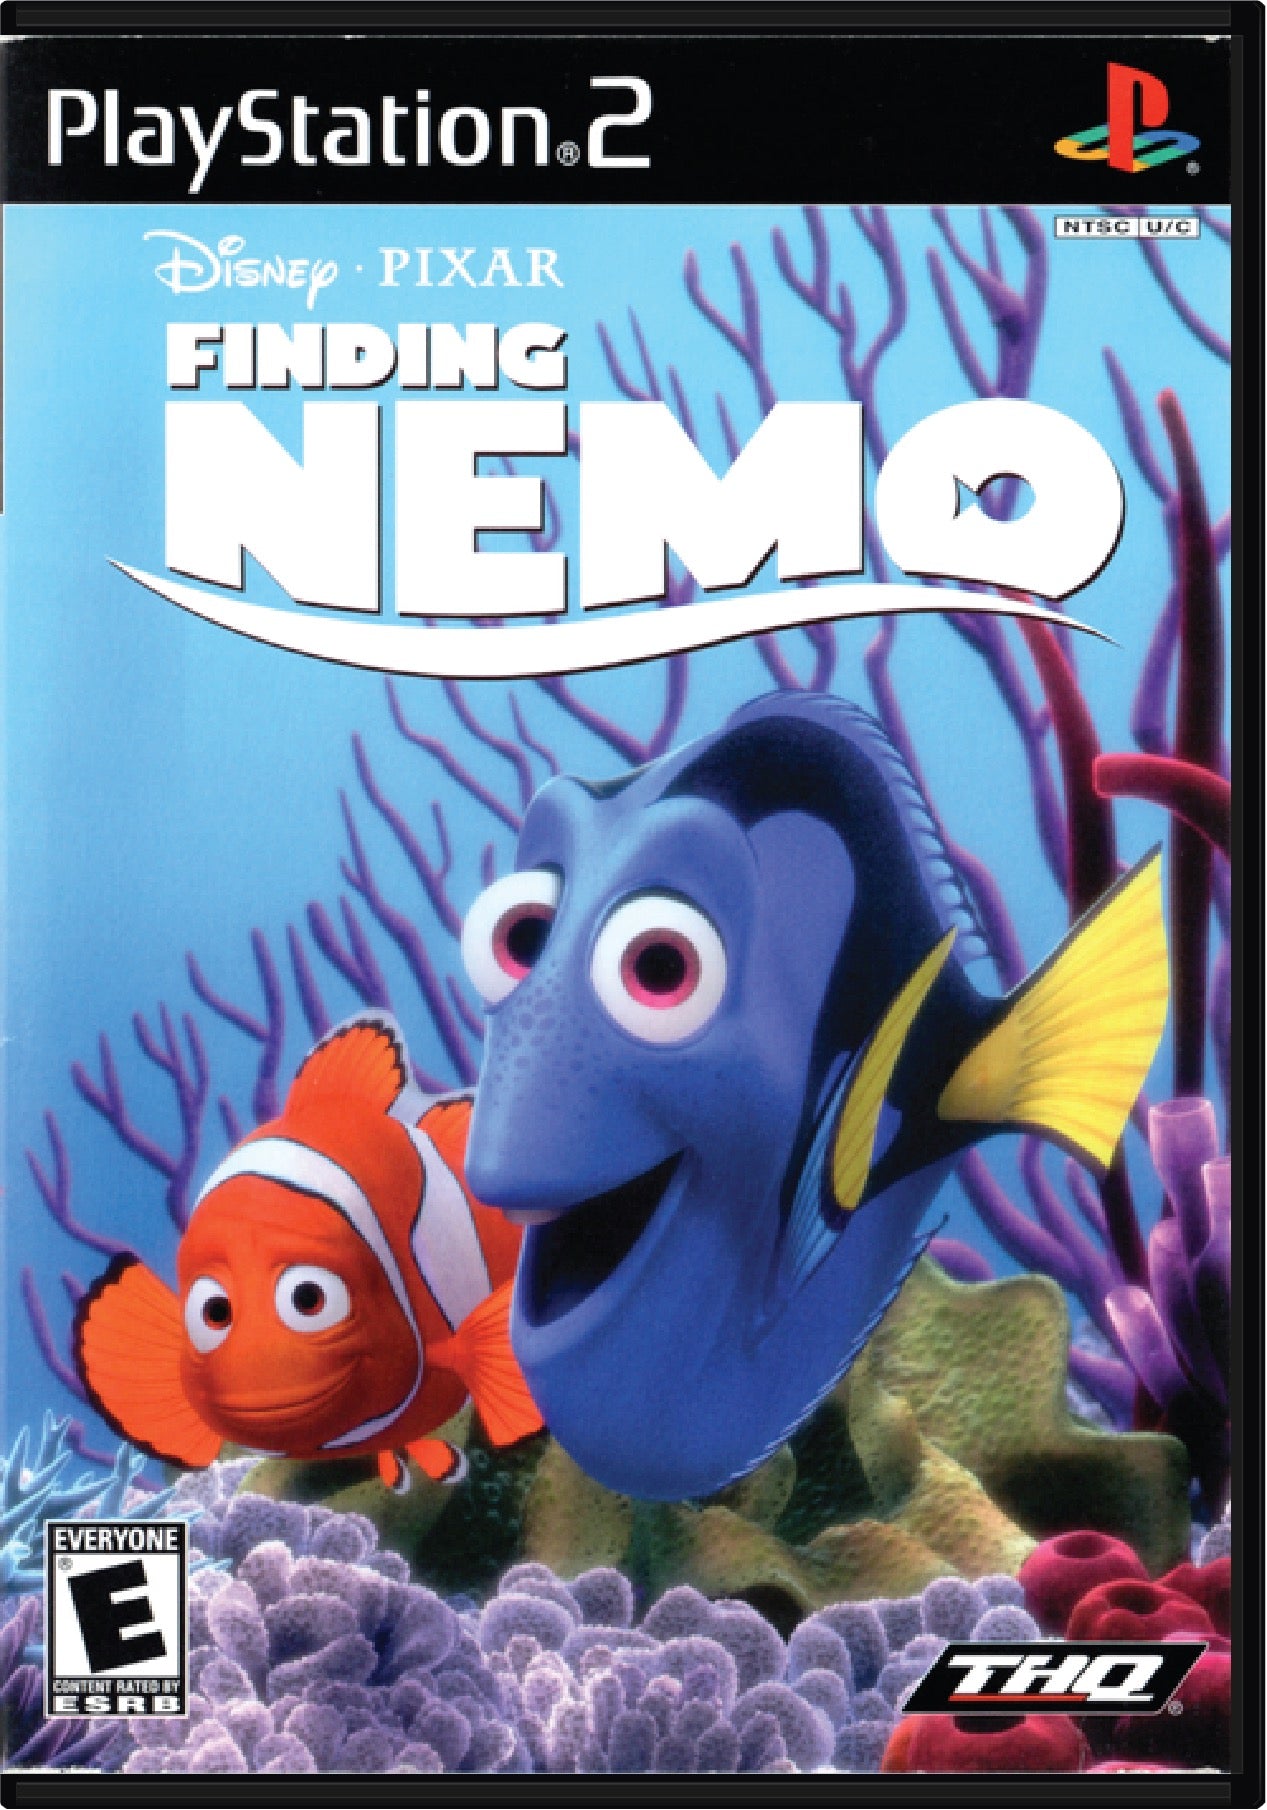 Finding Nemo Cover Art and Product Photo